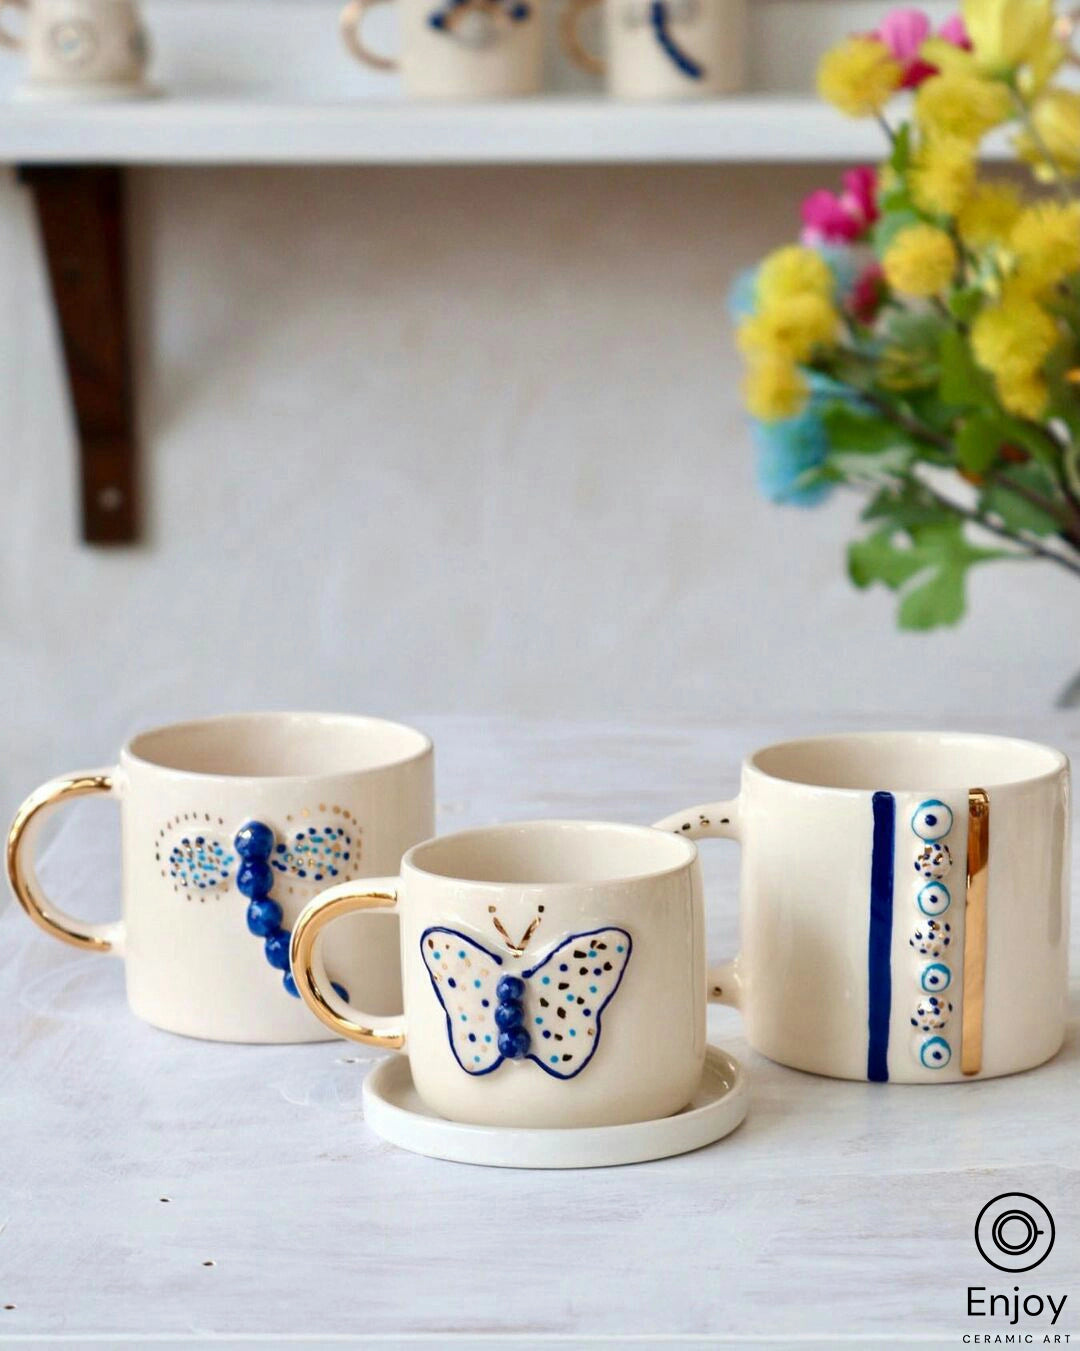 Three white ceramic mugs with golden handles on a white tabletop, each featuring unique blue designs: the left with evil eye beads, the center with a painted blue butterfly, and the right with a vertical line of evil eyes, displayed in front of a shelf with vibrant flowers adding a splash of color to the serene setting.